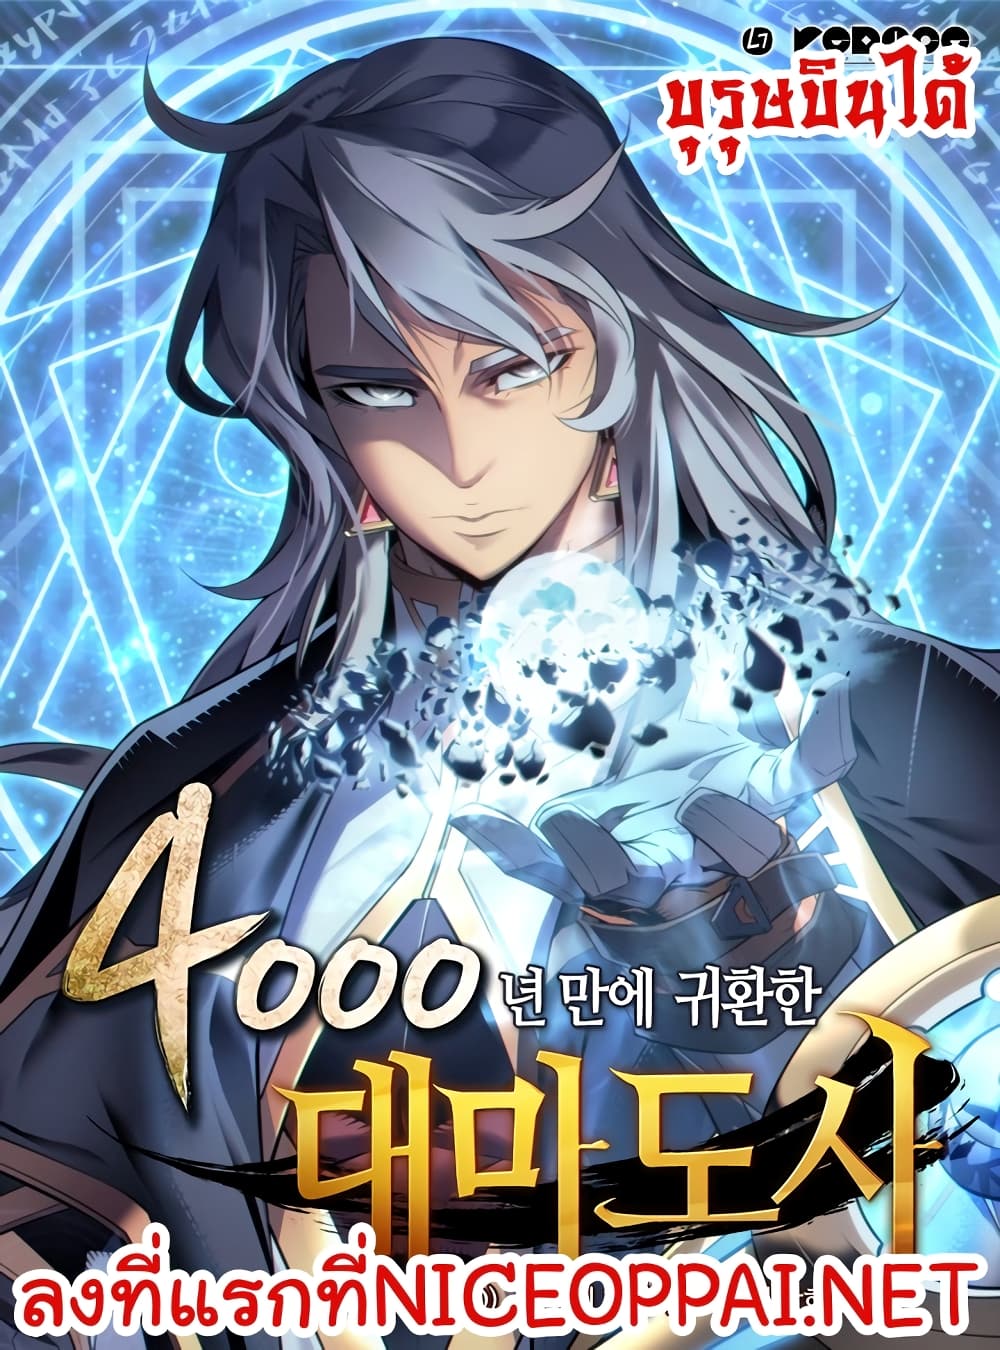 The Great Mage Returns After 4000 Years 43 (1)